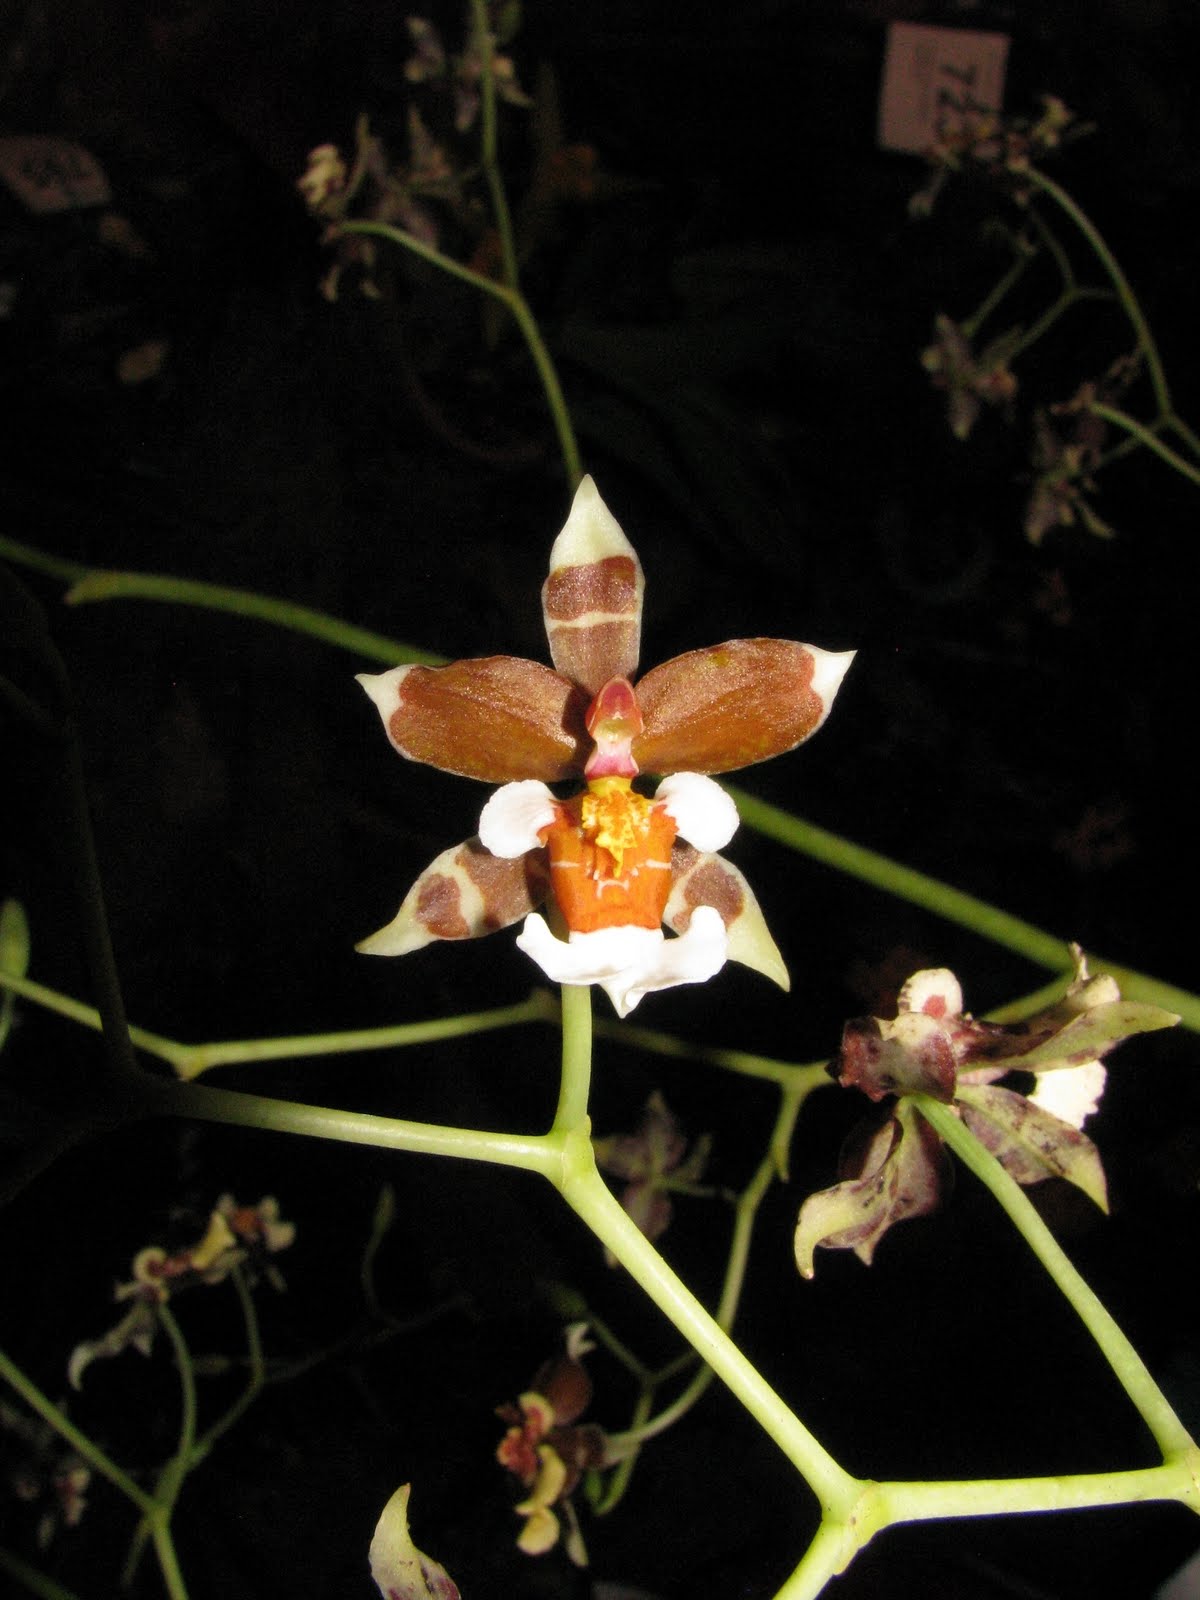 The American Orchid Society